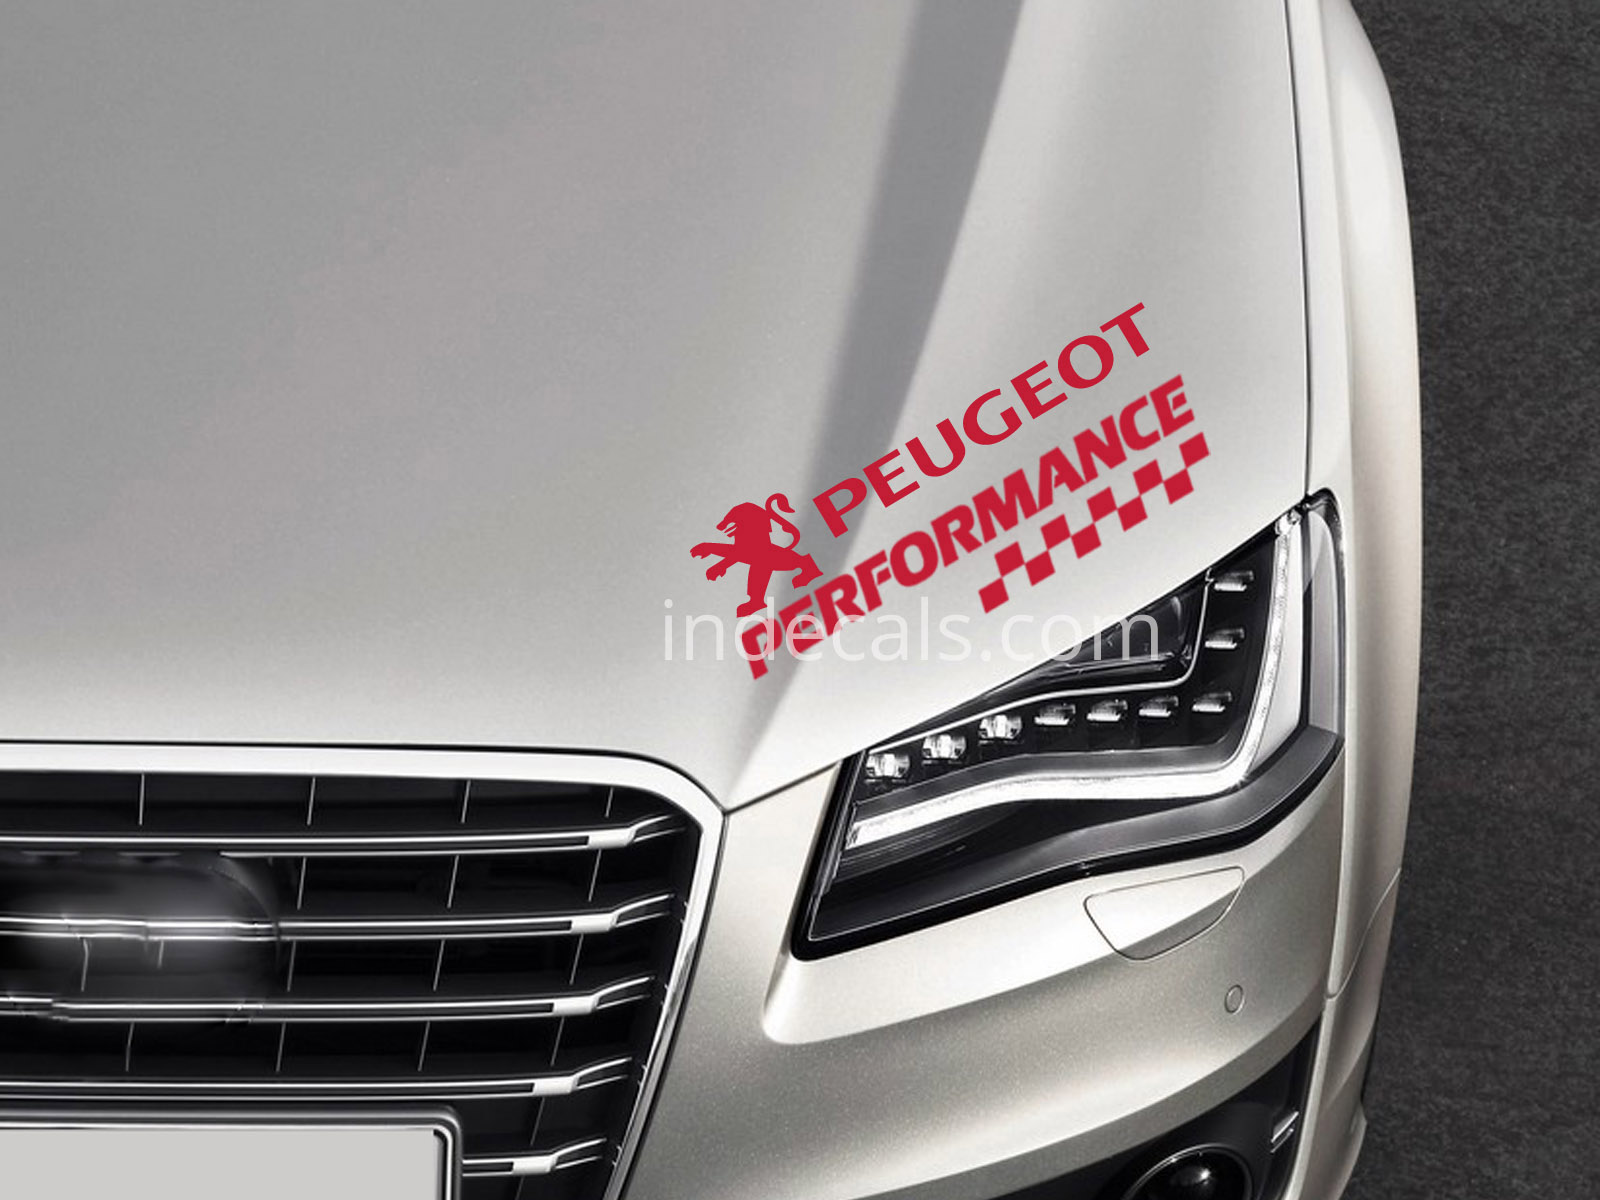 1 x Peugeot Performance Sticker - Red